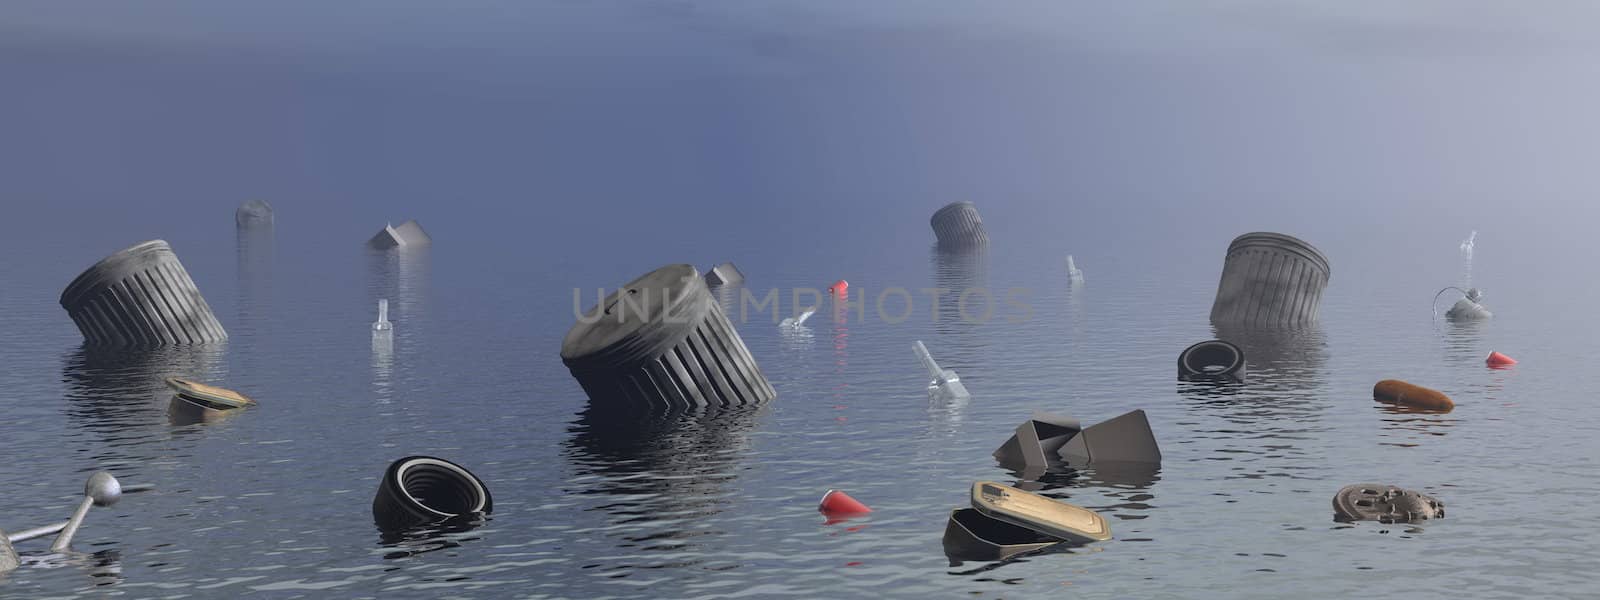 Pollution in the ocean - 3D render by Elenaphotos21